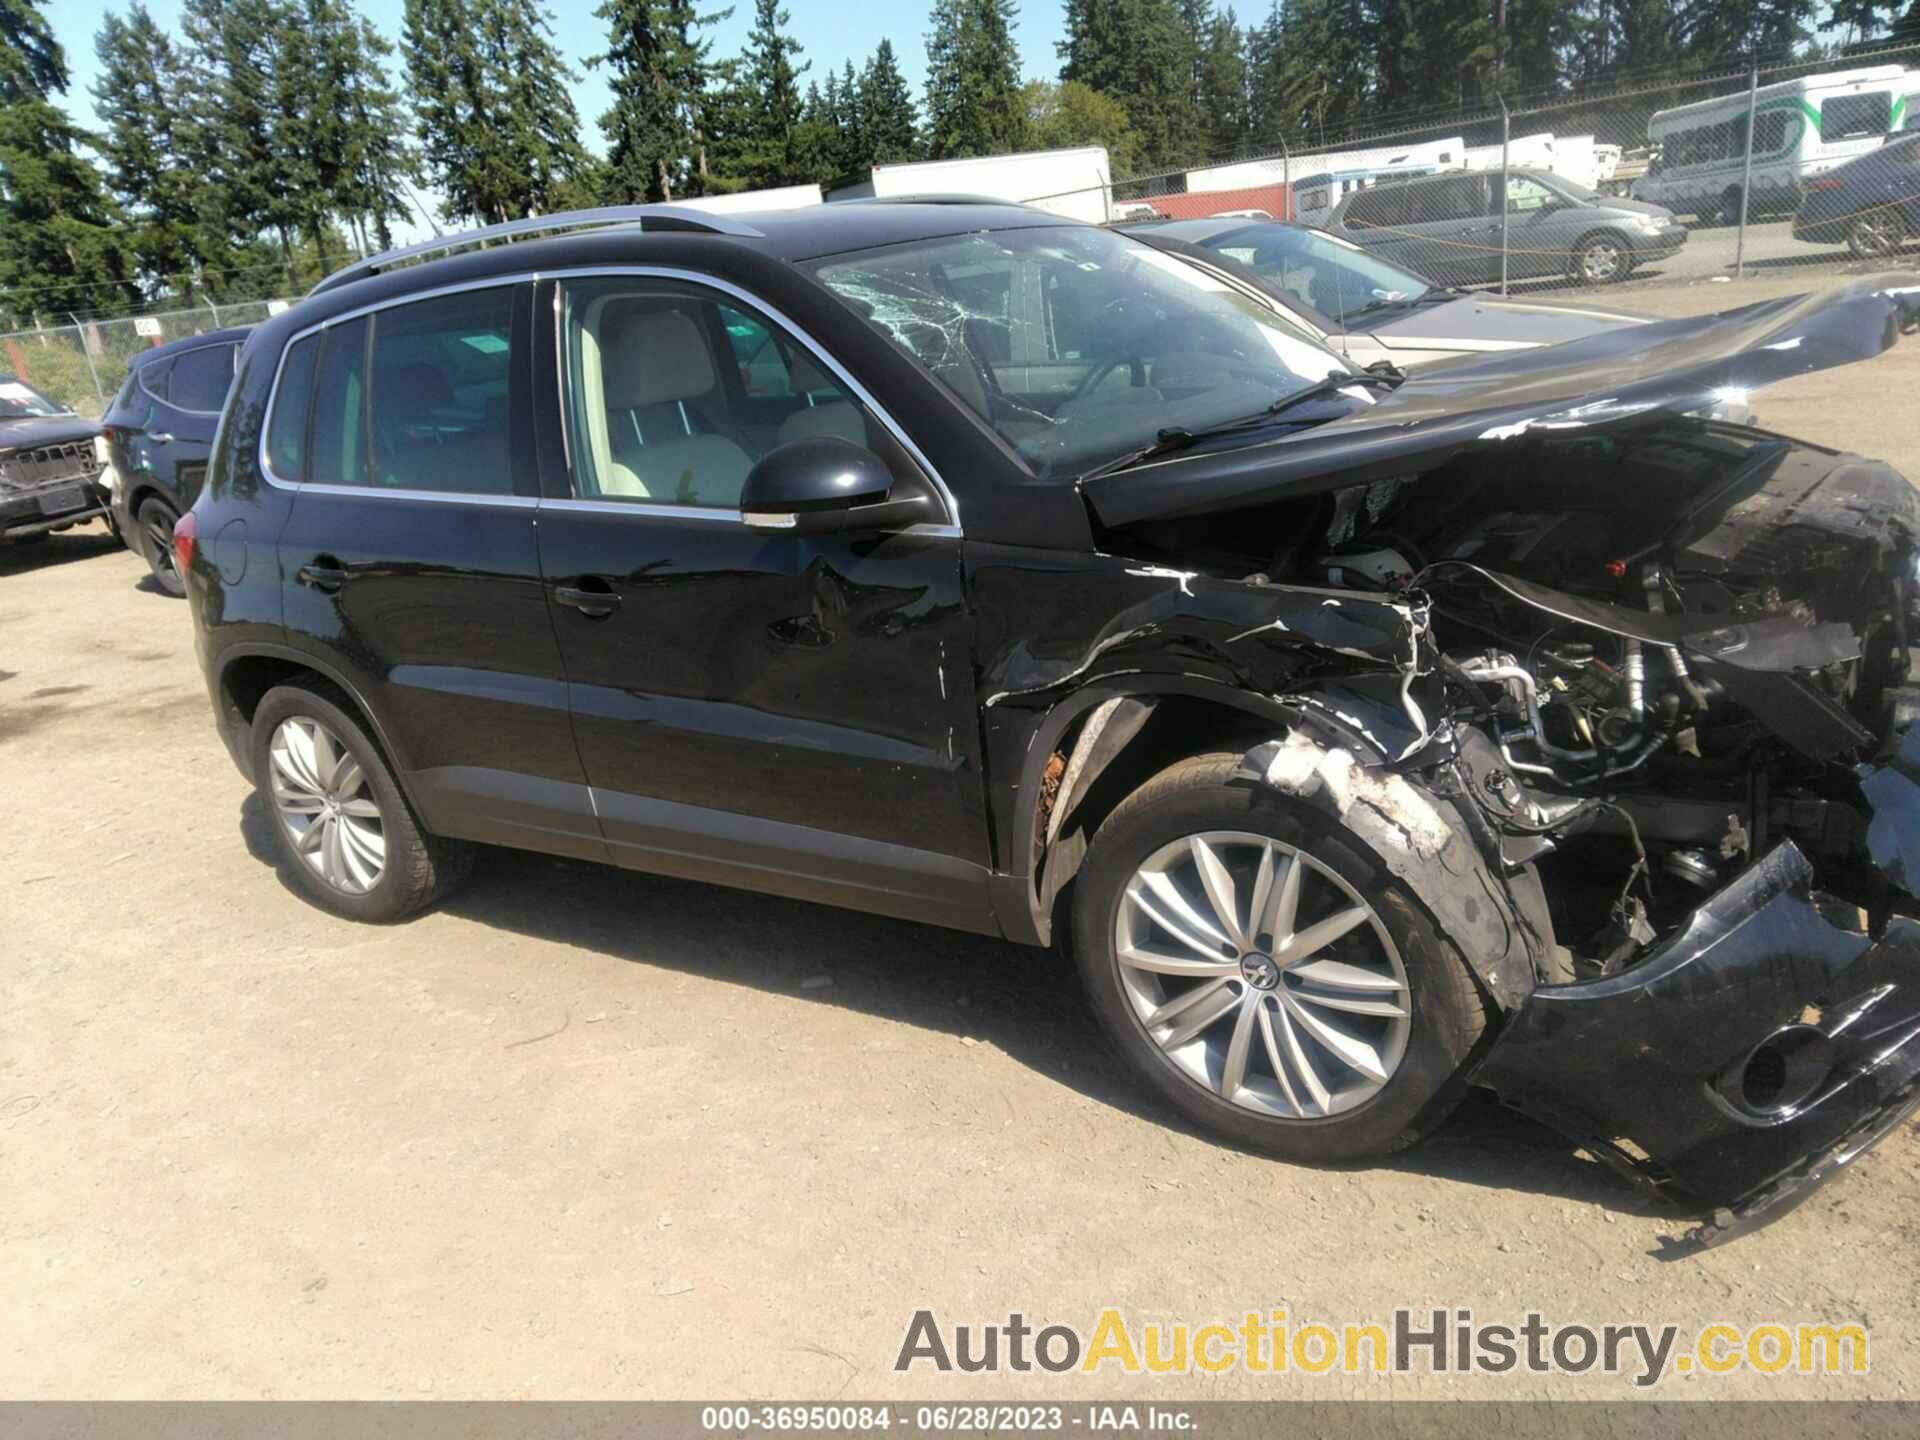 VOLKSWAGEN TIGUAN SE 4MOTION WSUNROOF &, WVGBV7AX5BW522925